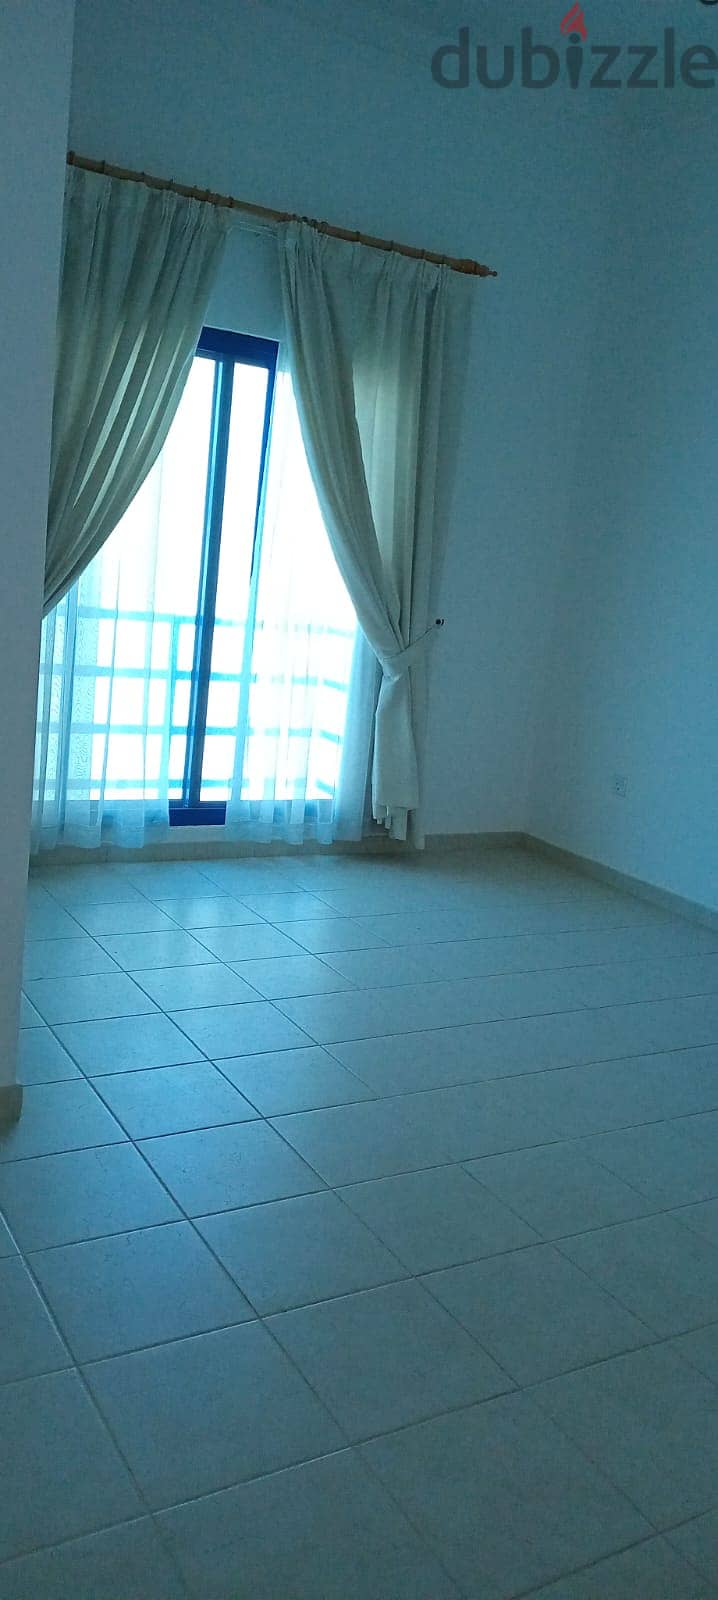 Semi Furnished 3 Bedroom Flats For Rent 3